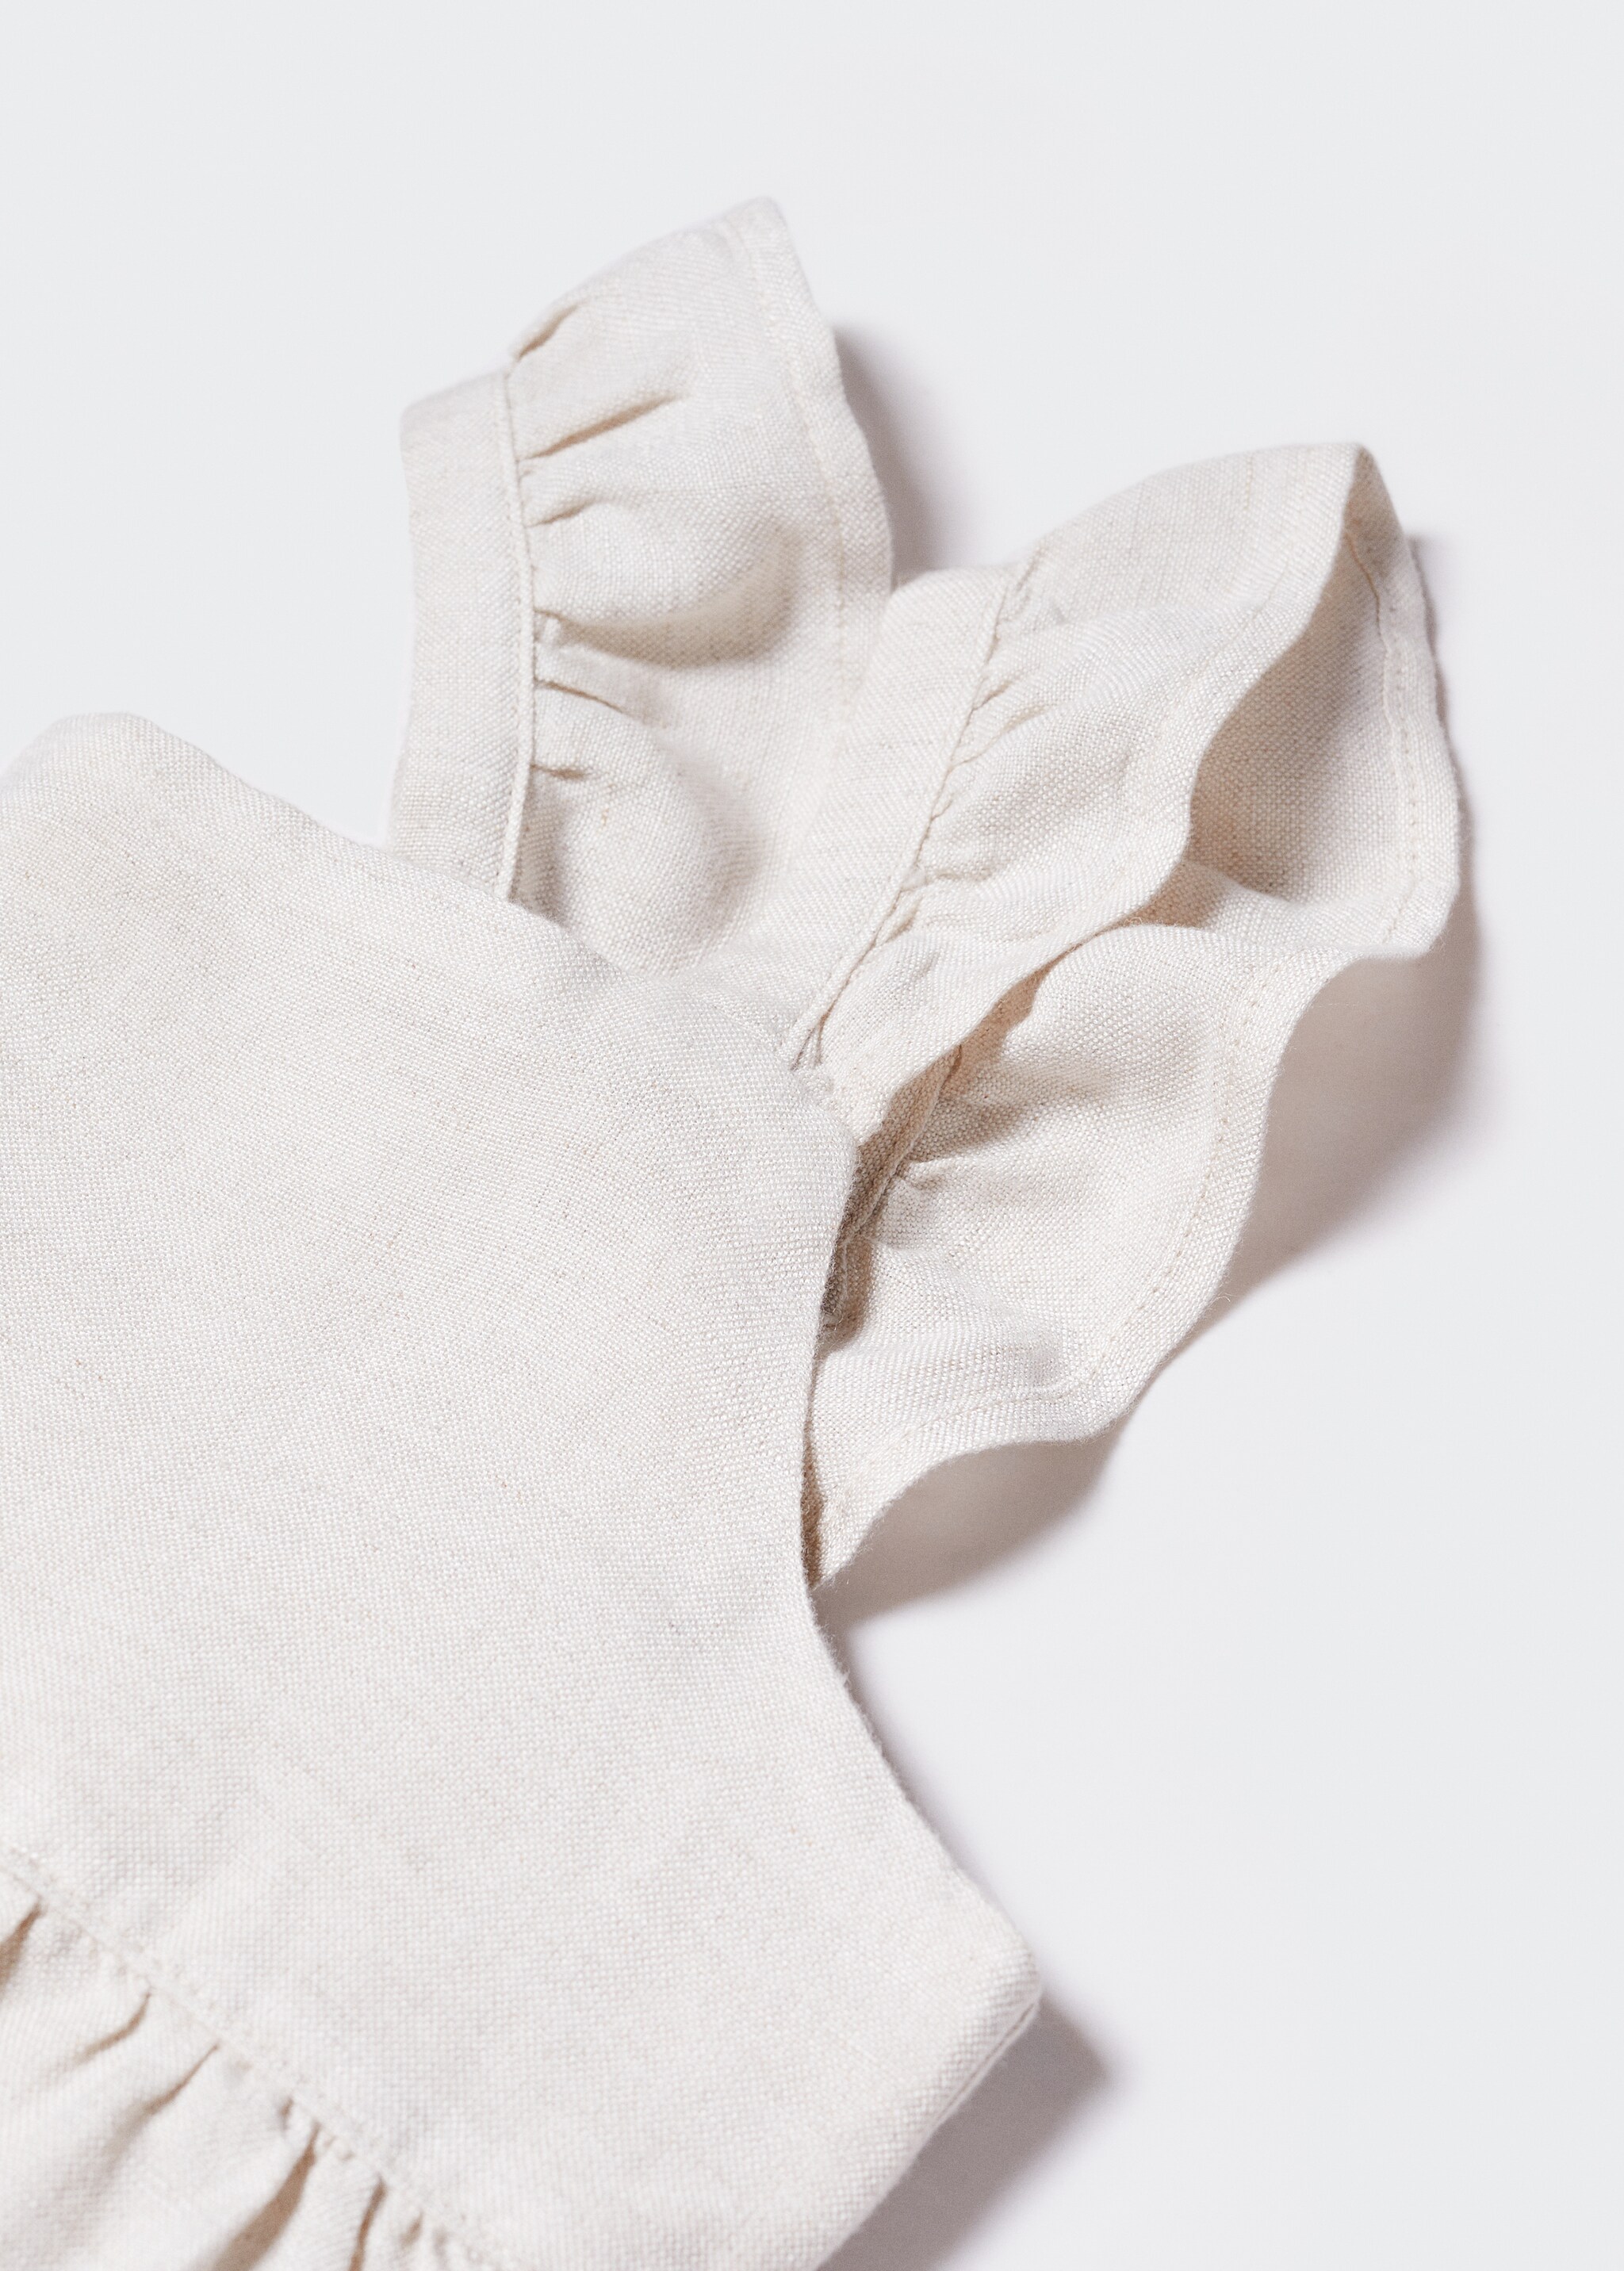 Ruffled linen top - Details of the article 8